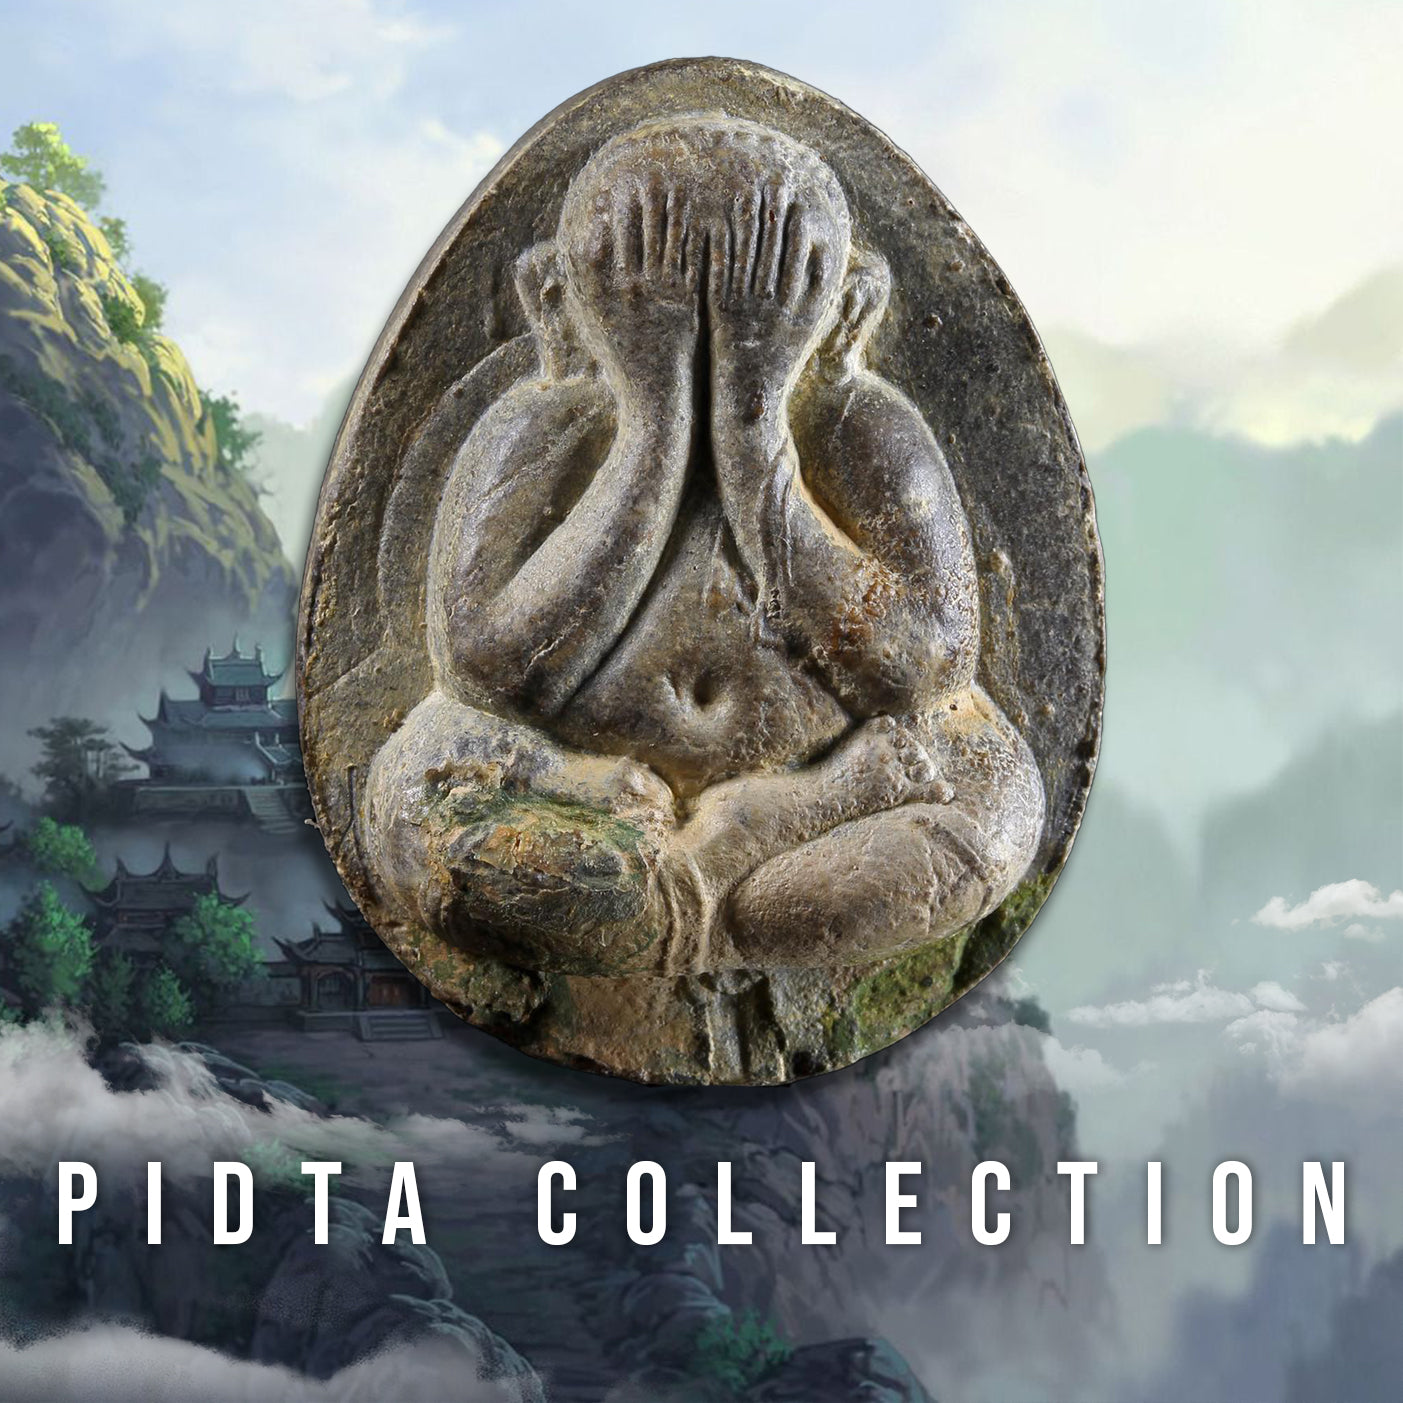 Pidta Collection